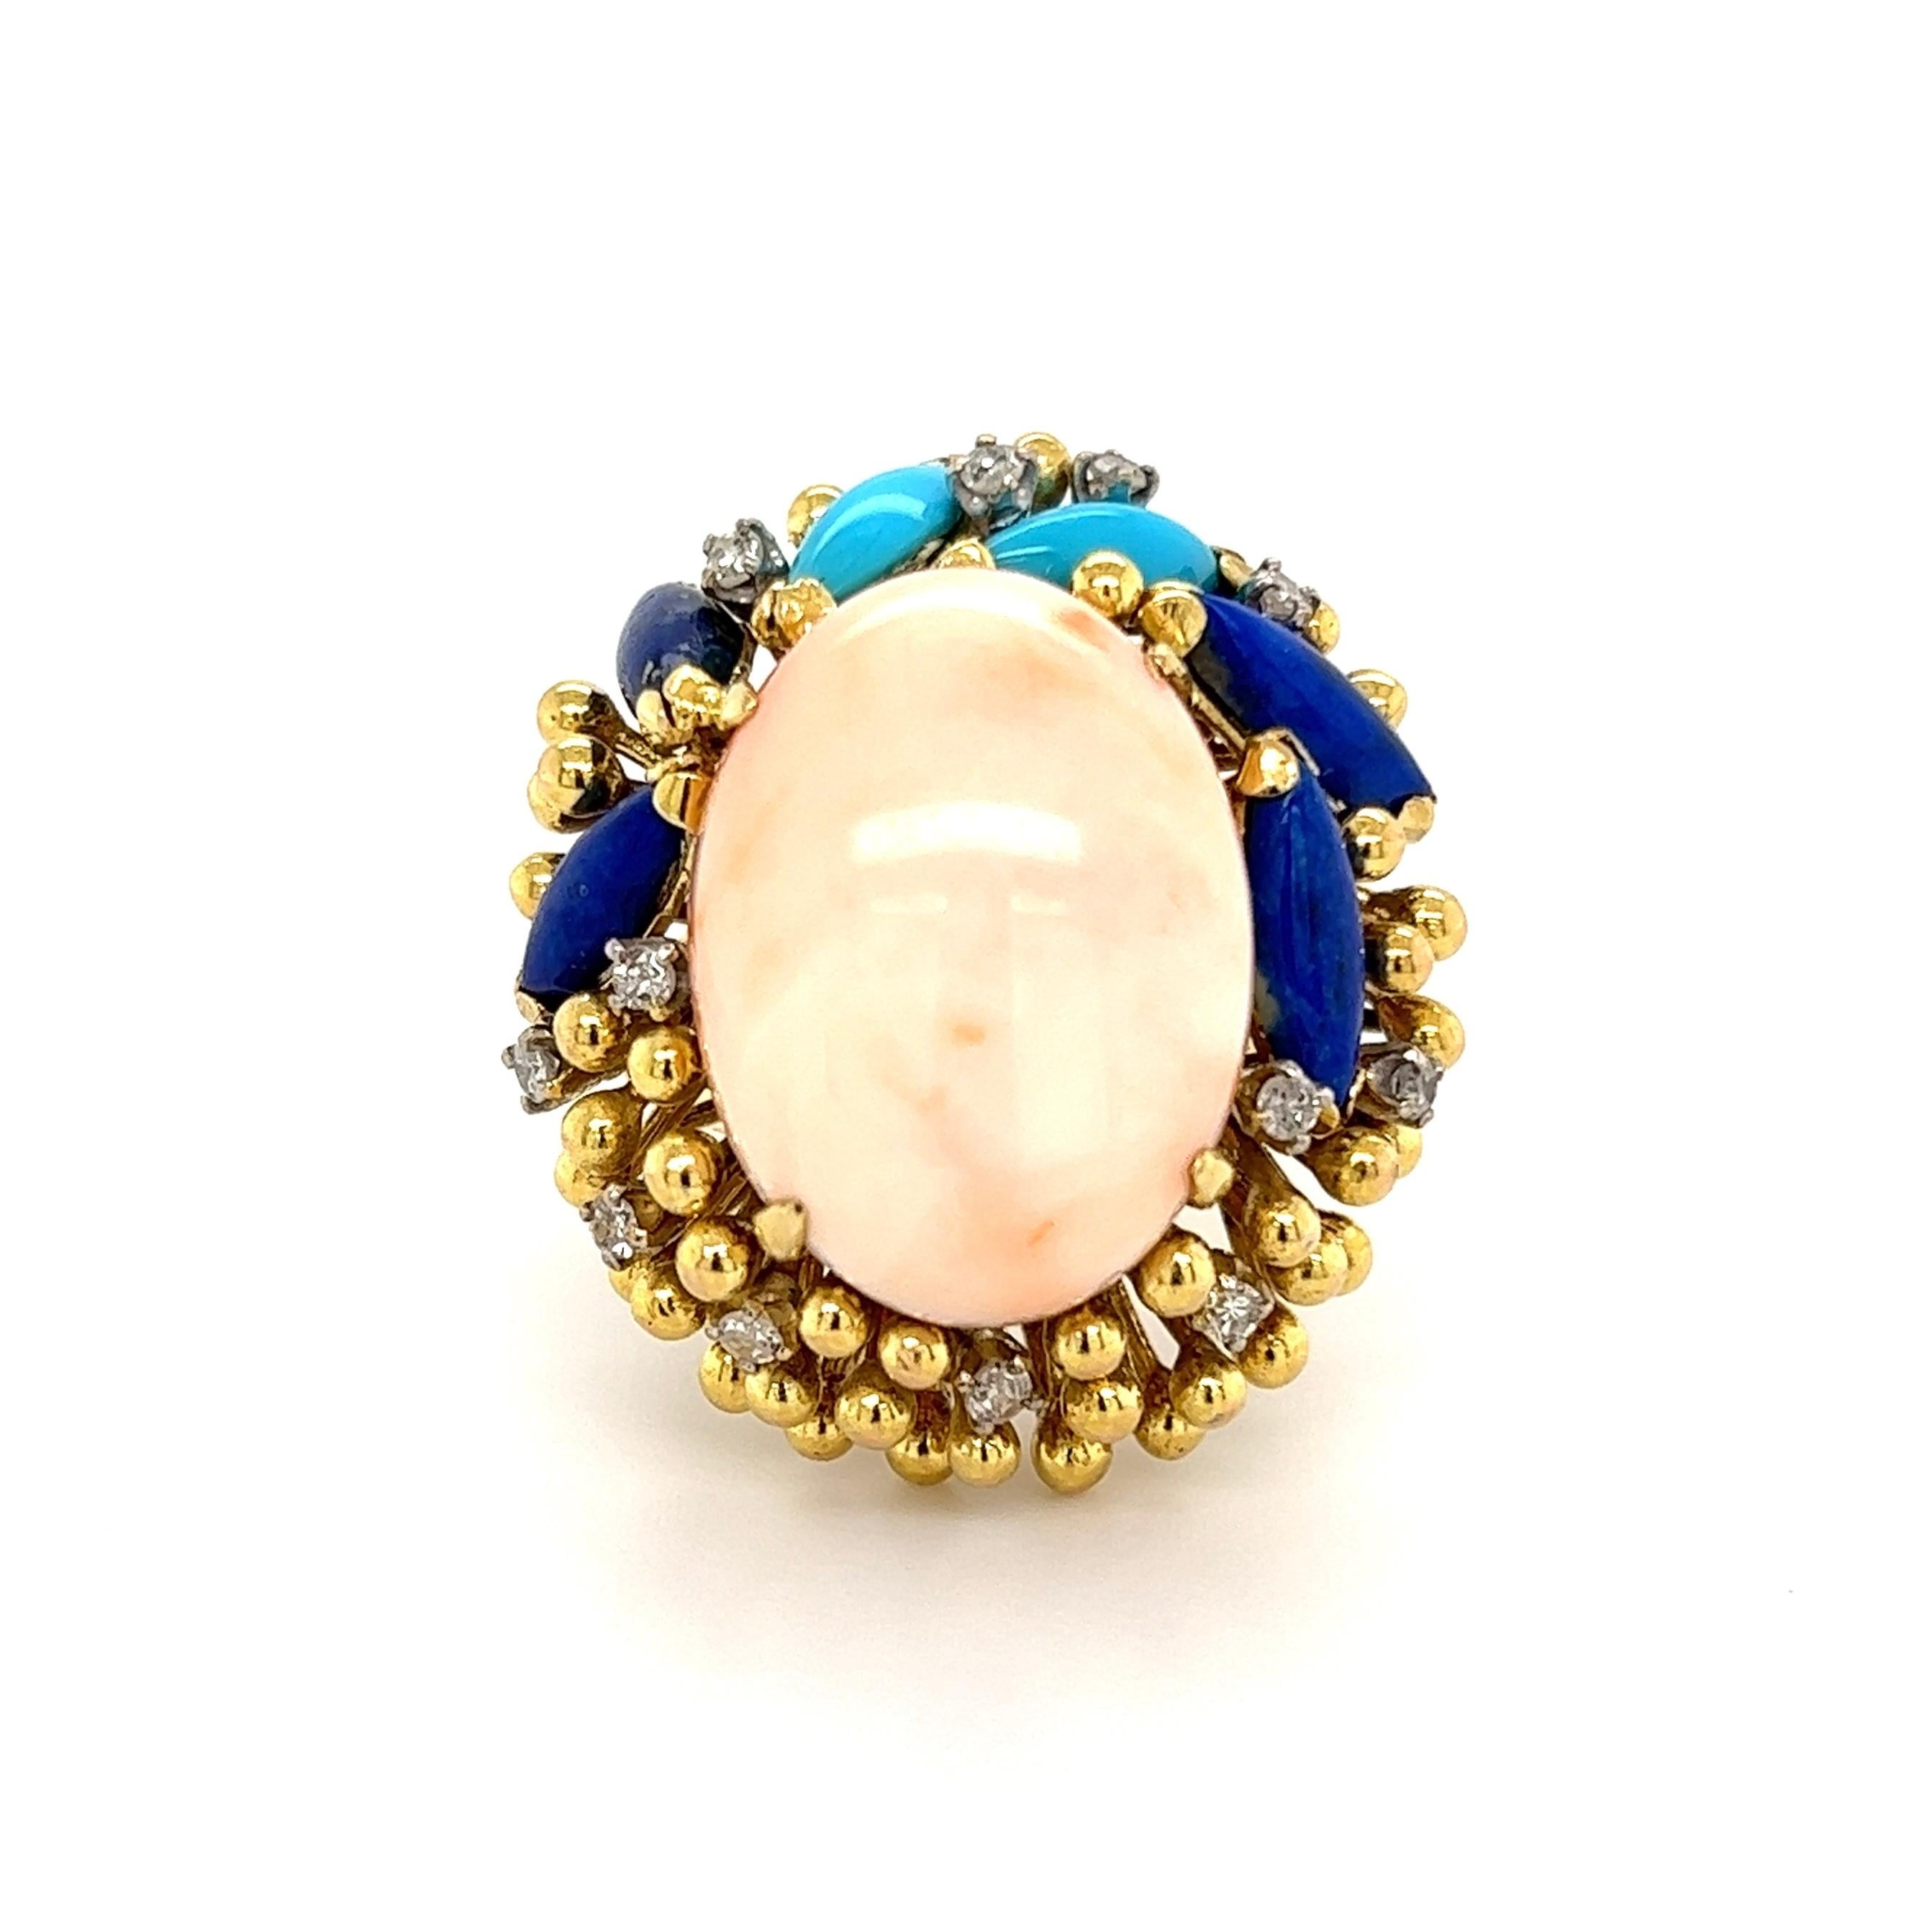 Modernist Angelskin Coral Turquoise Lapis and Diamond Gold Ring Estate Fine Jewelry For Sale